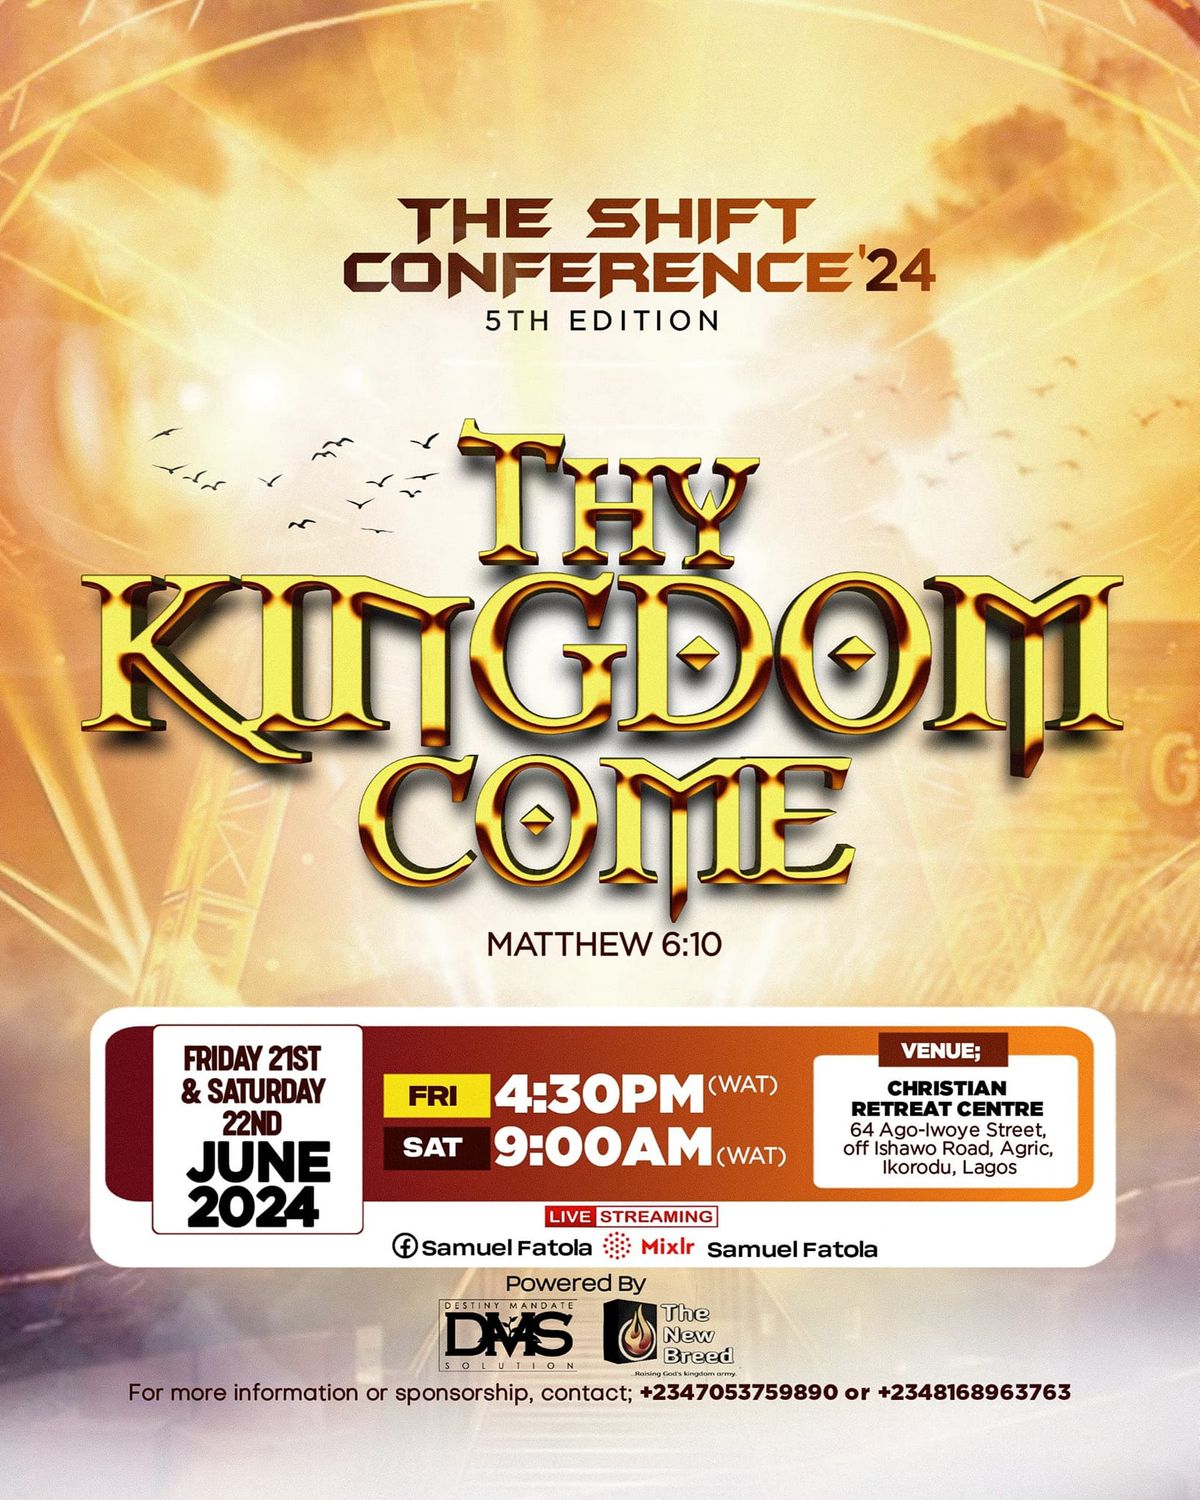 The Shift Conference 2024